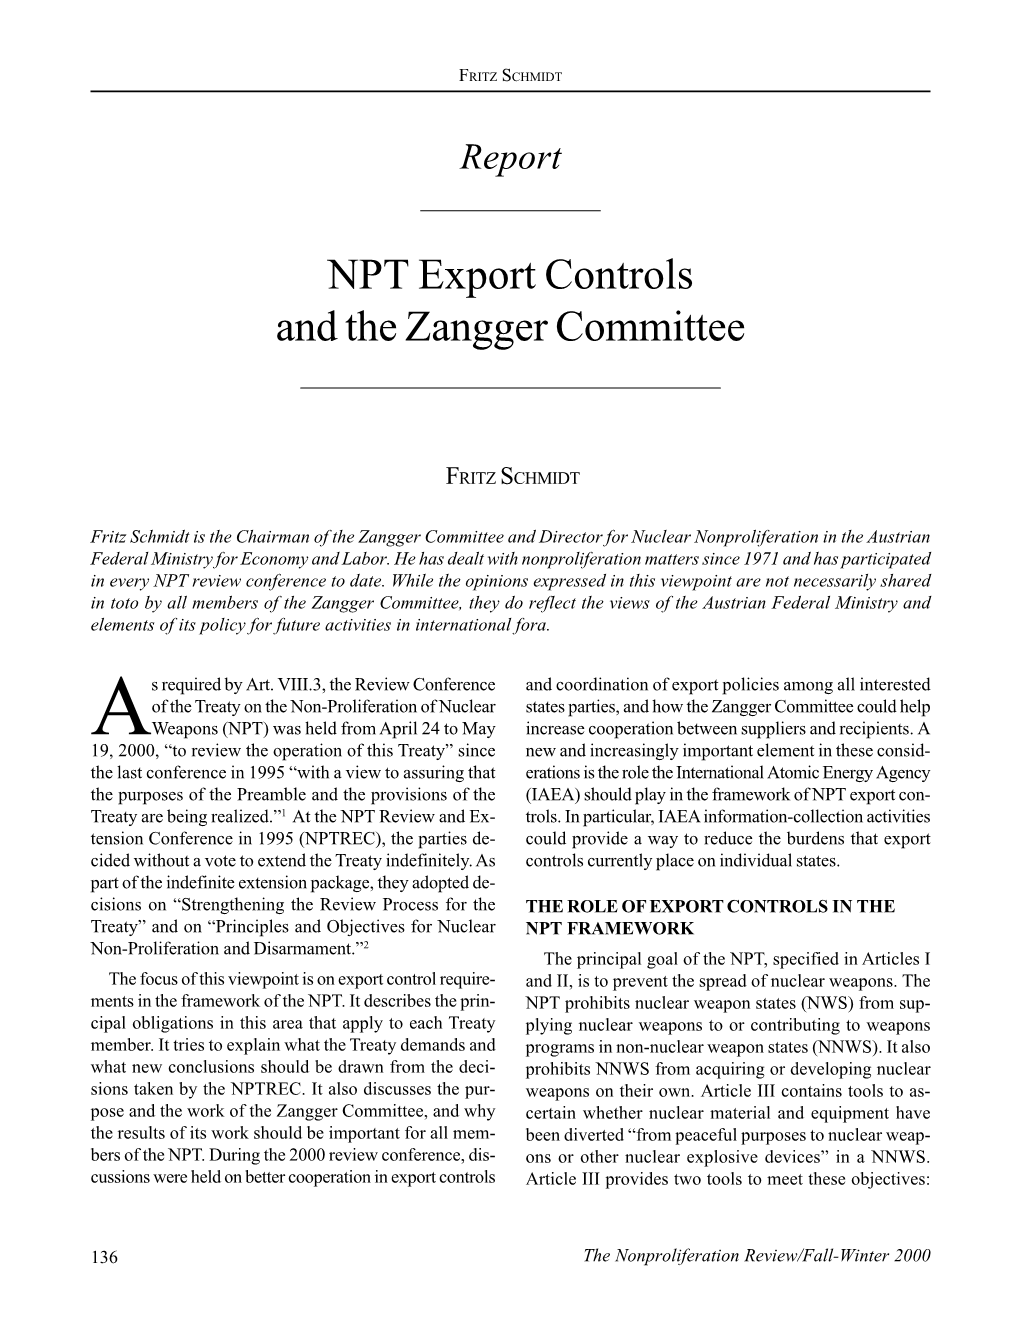 NPR73: NPT Export Controls and the Zangger Committee